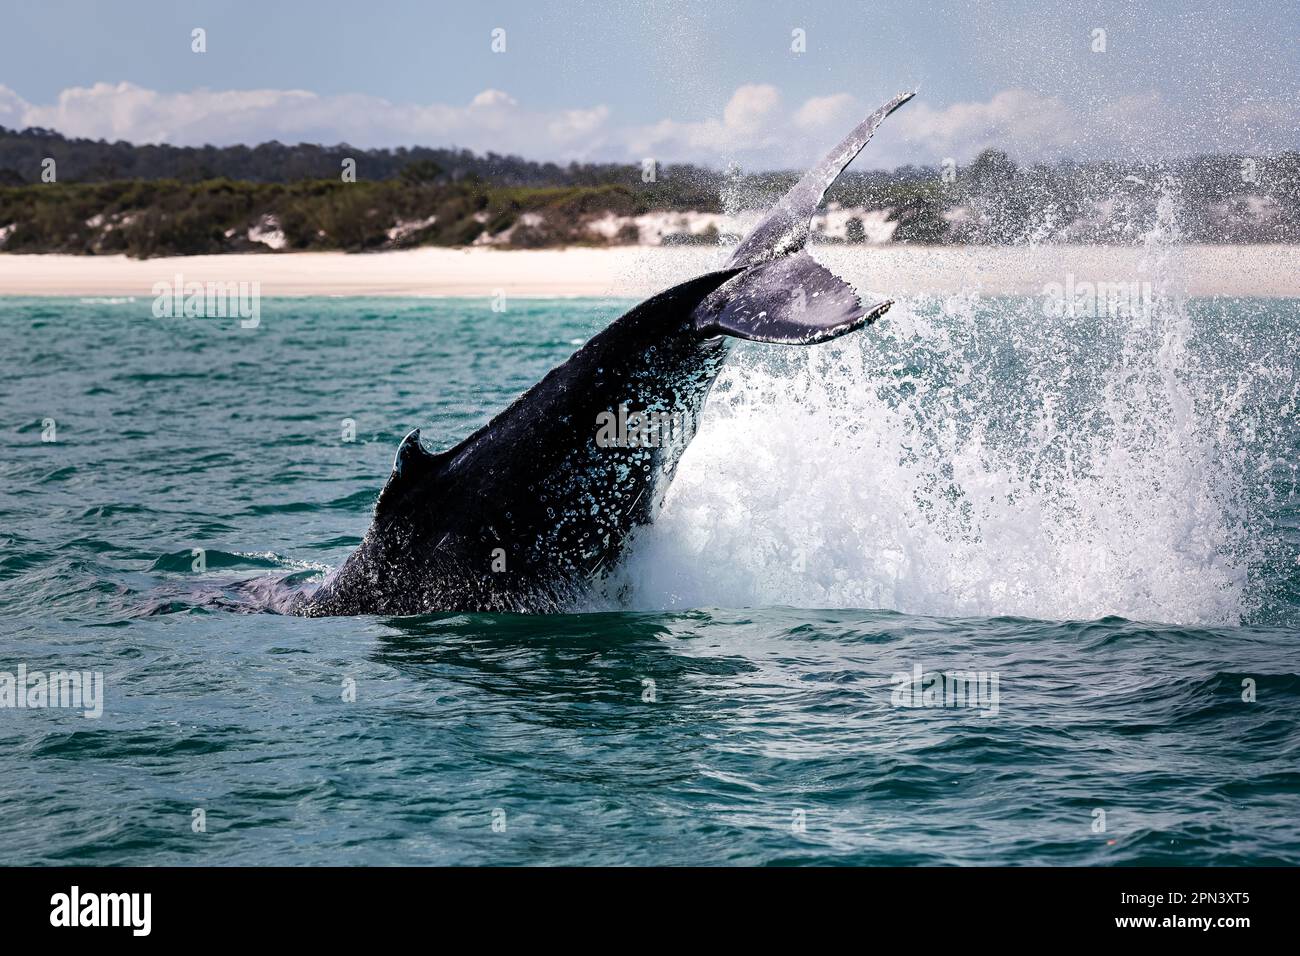 Wild big Humpback whale jumping, breaching, in the ocean in front of the australian coast, Australia Stock Photo